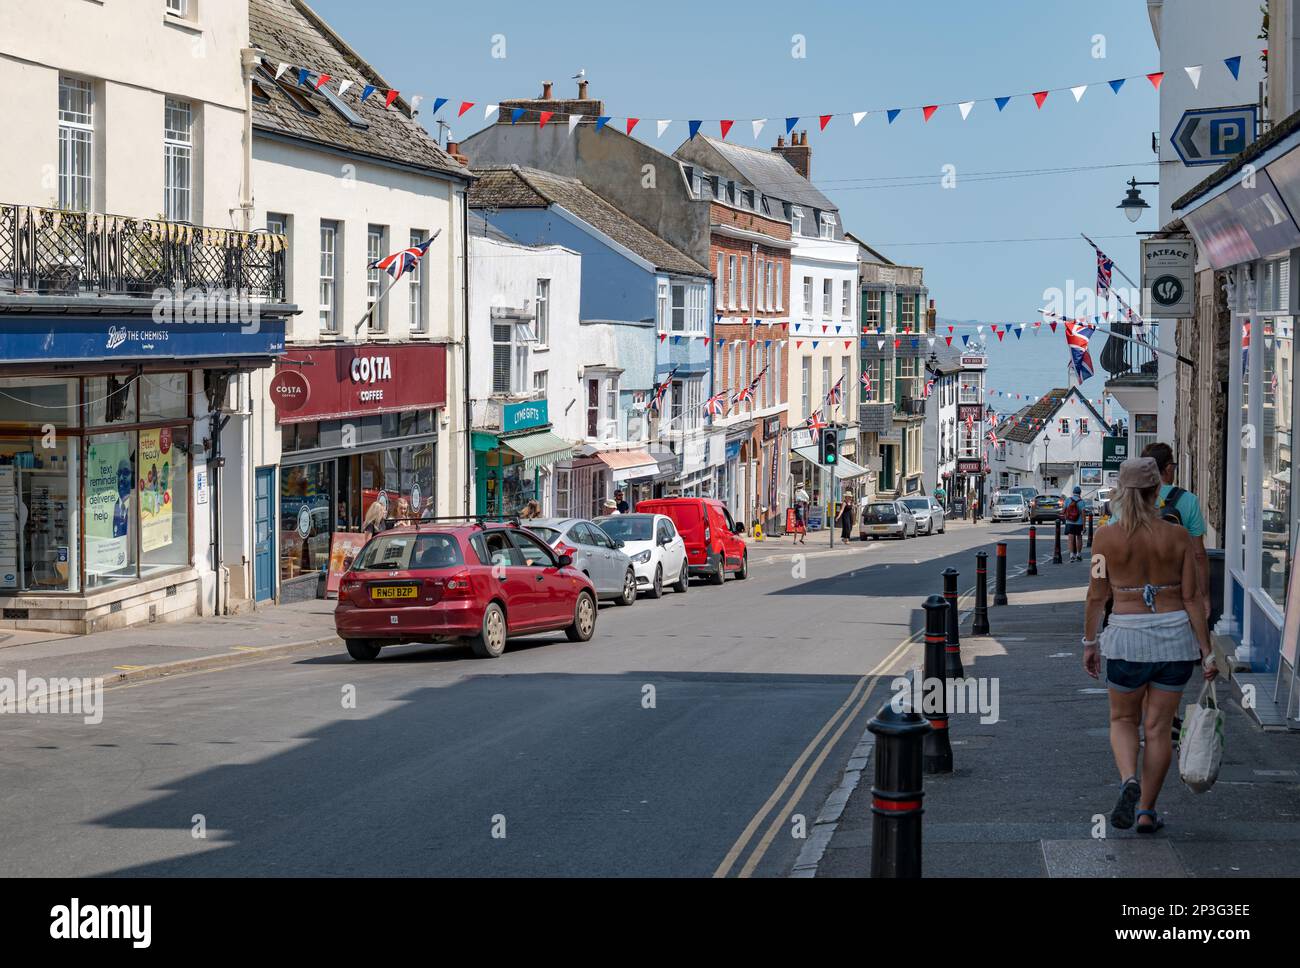 View of Broad Street shops with Boots chemist and Costa coffee shops, Lyme Regis, Dorcst, England, UK Stock Photo